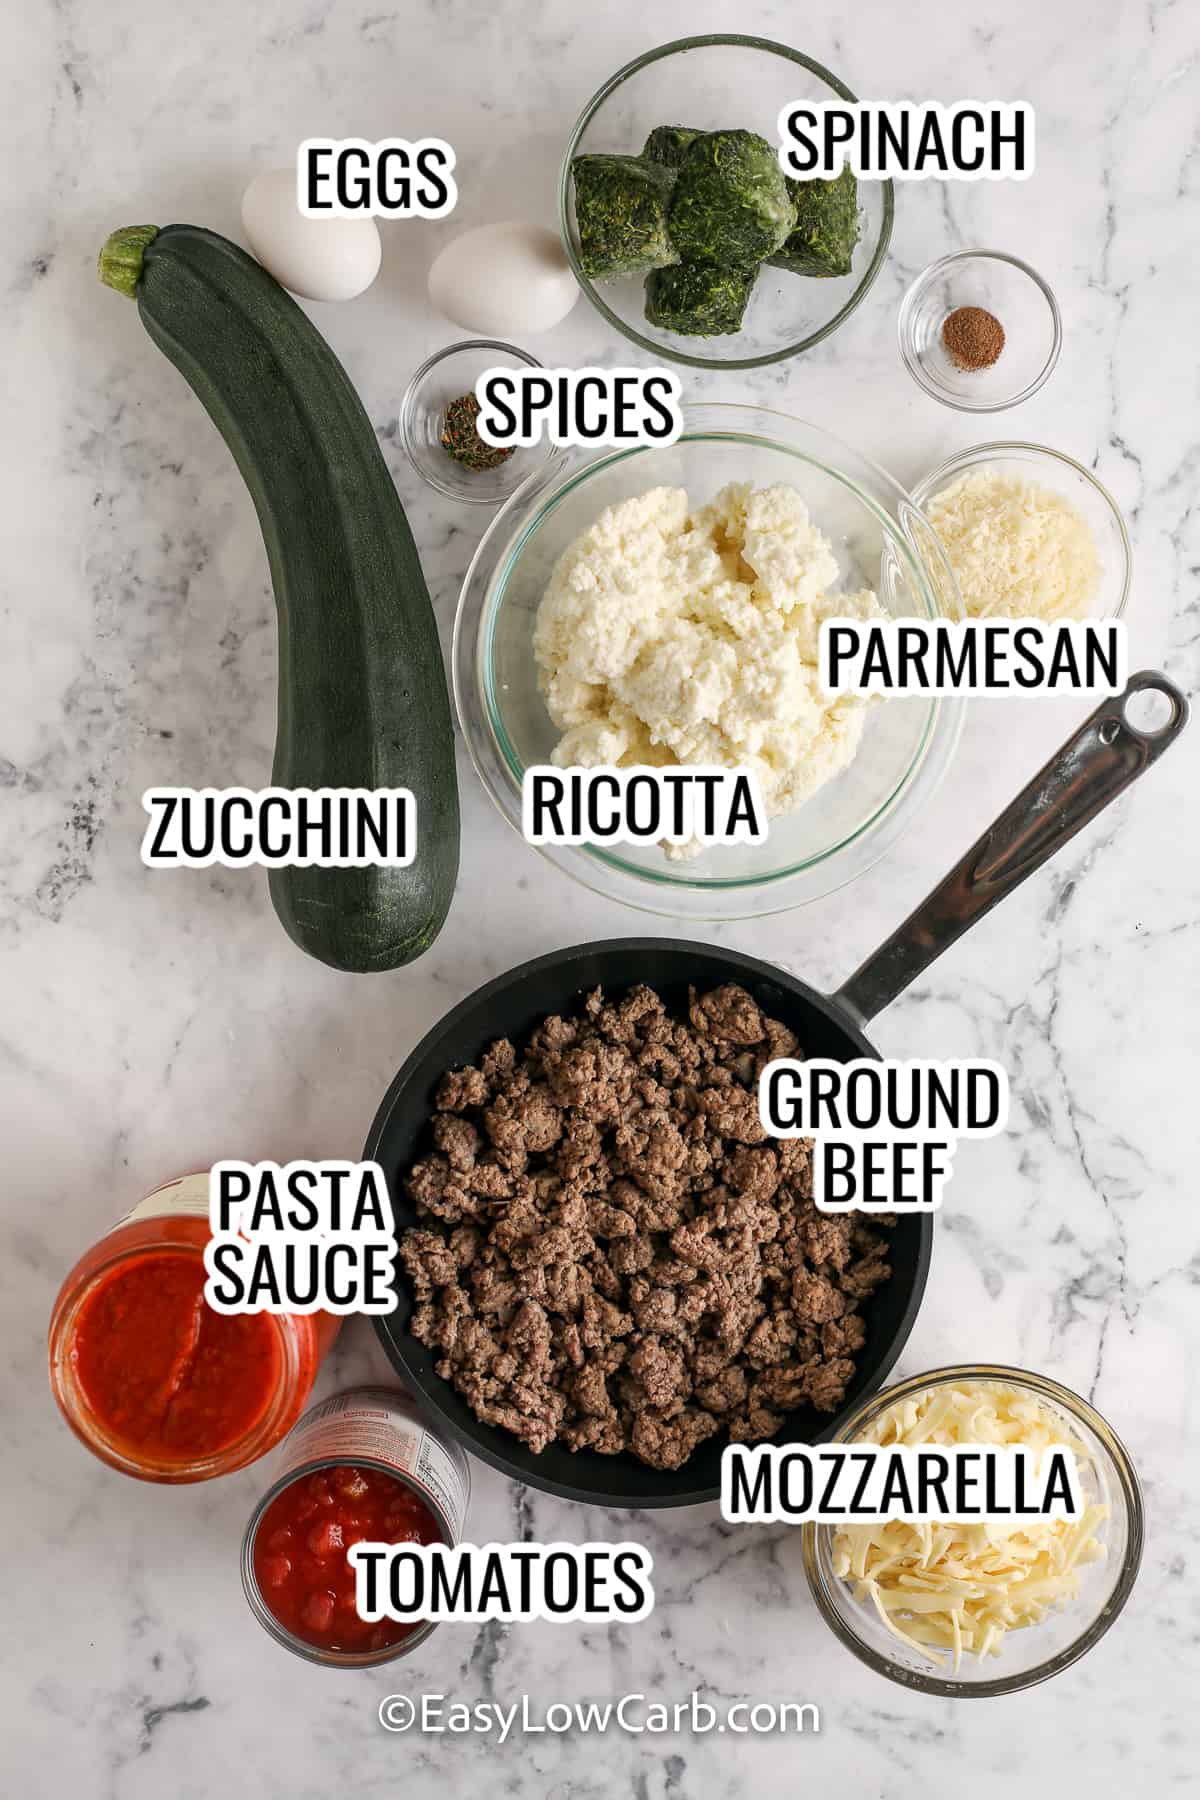 ingredients assembled to make low carb zucchini lasagna, including zucchini, ricotta, mozzarella, parmesan, spinach, and eggs,